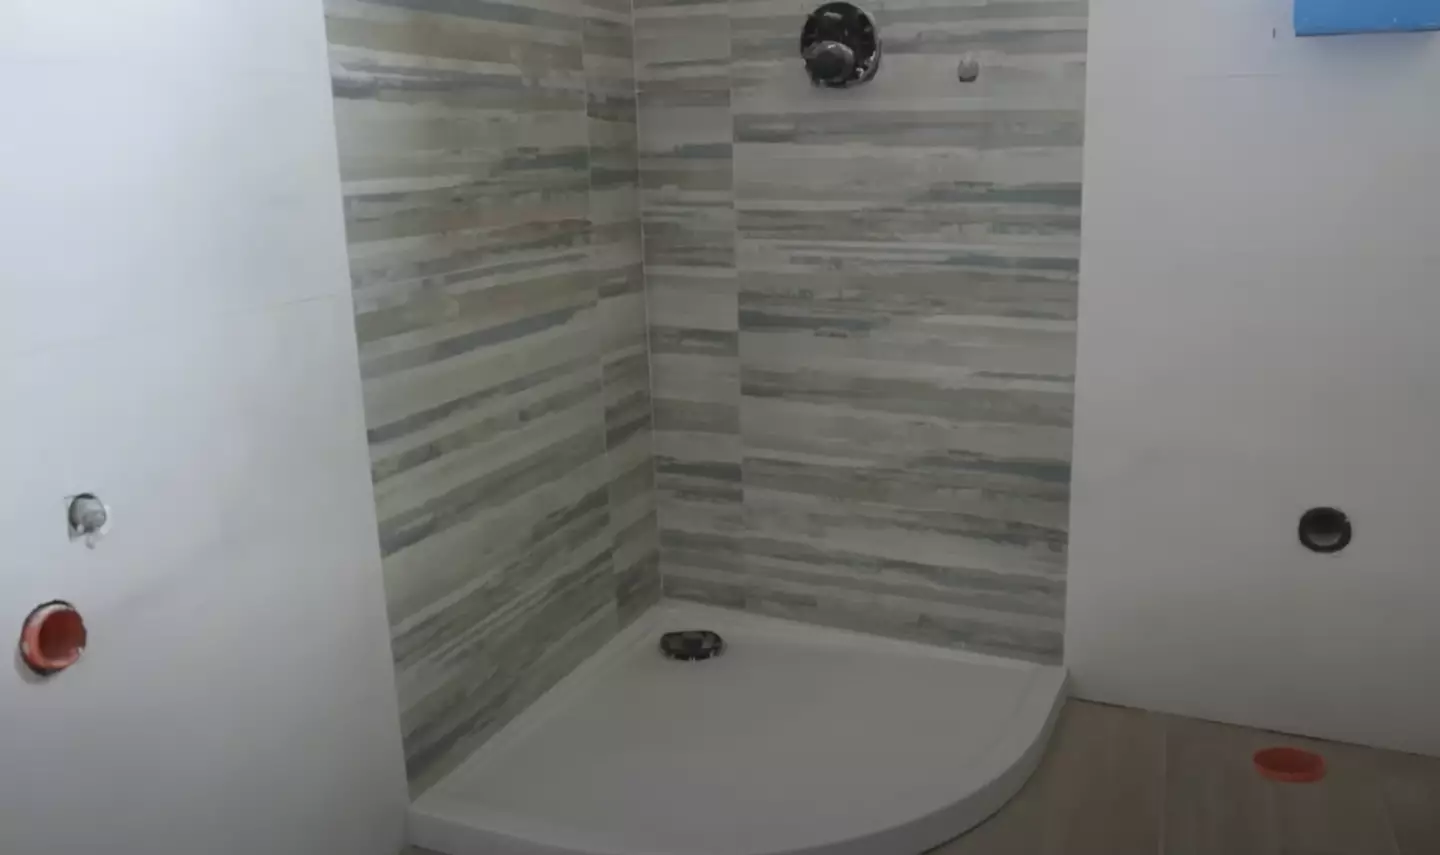 The new bathroom has been fitted. (YouTube/Insider News)